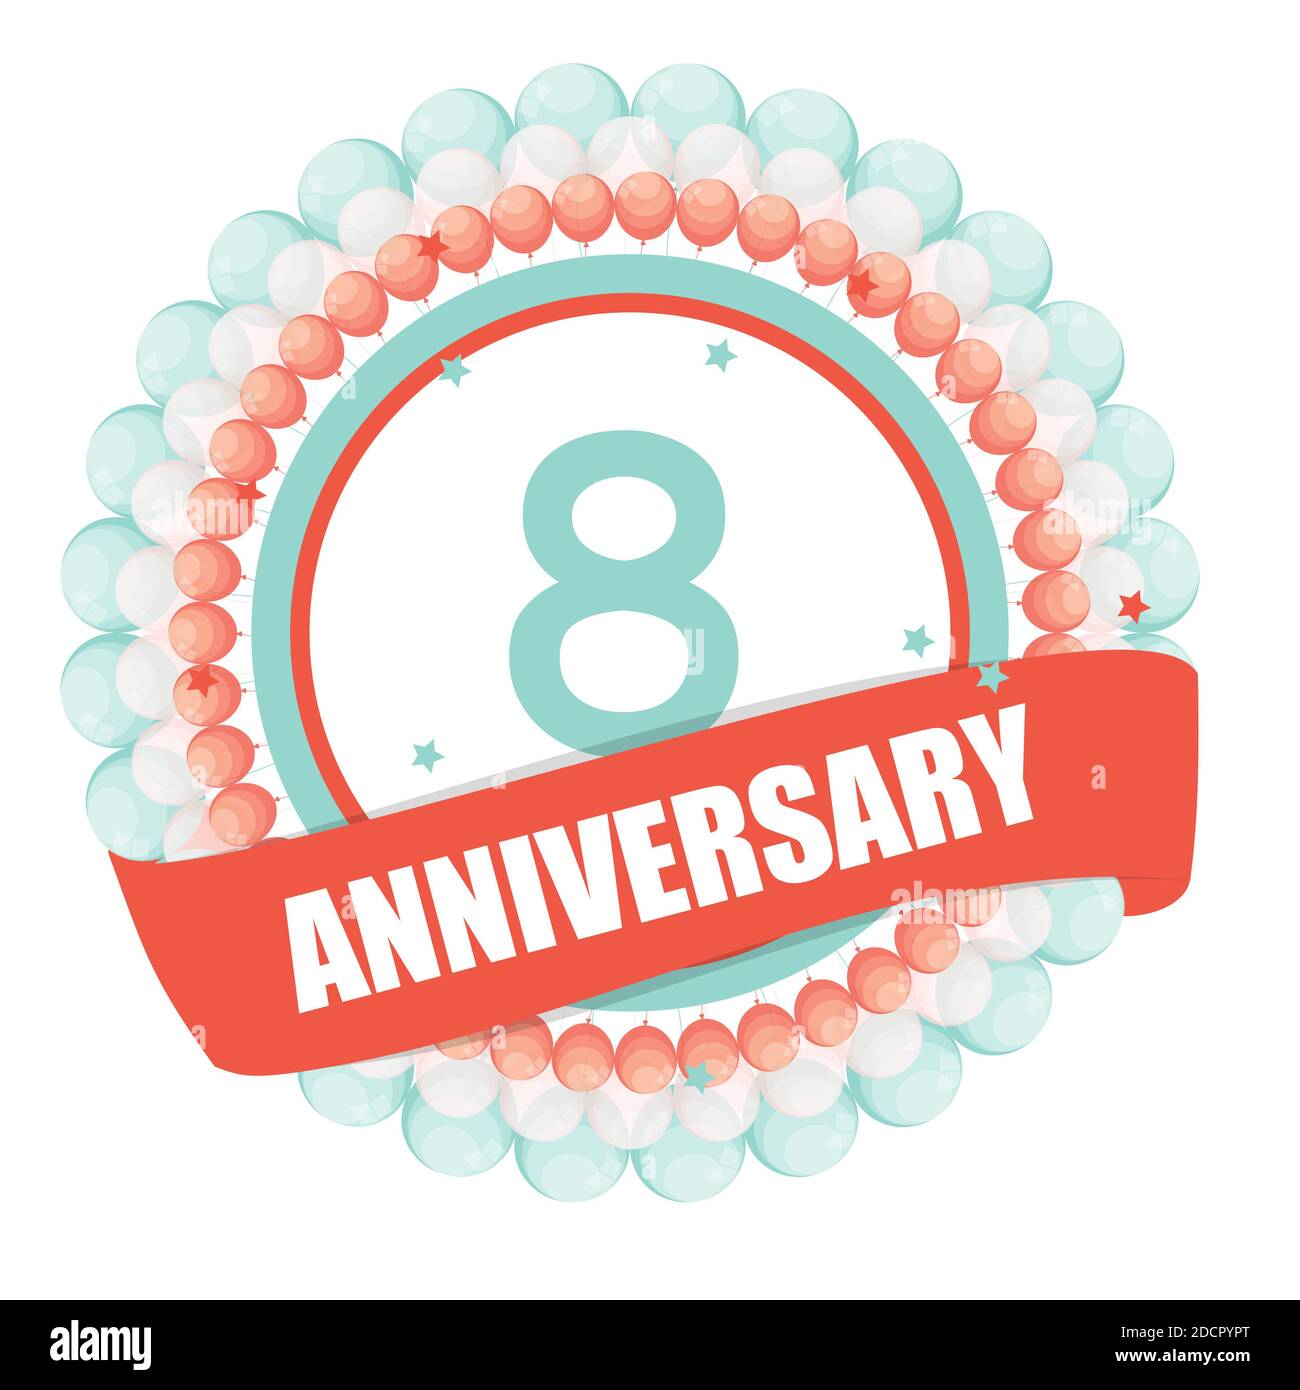 Cute Template 8 Years Anniversary with Balloons and Ribbon Illustration Stock Photo